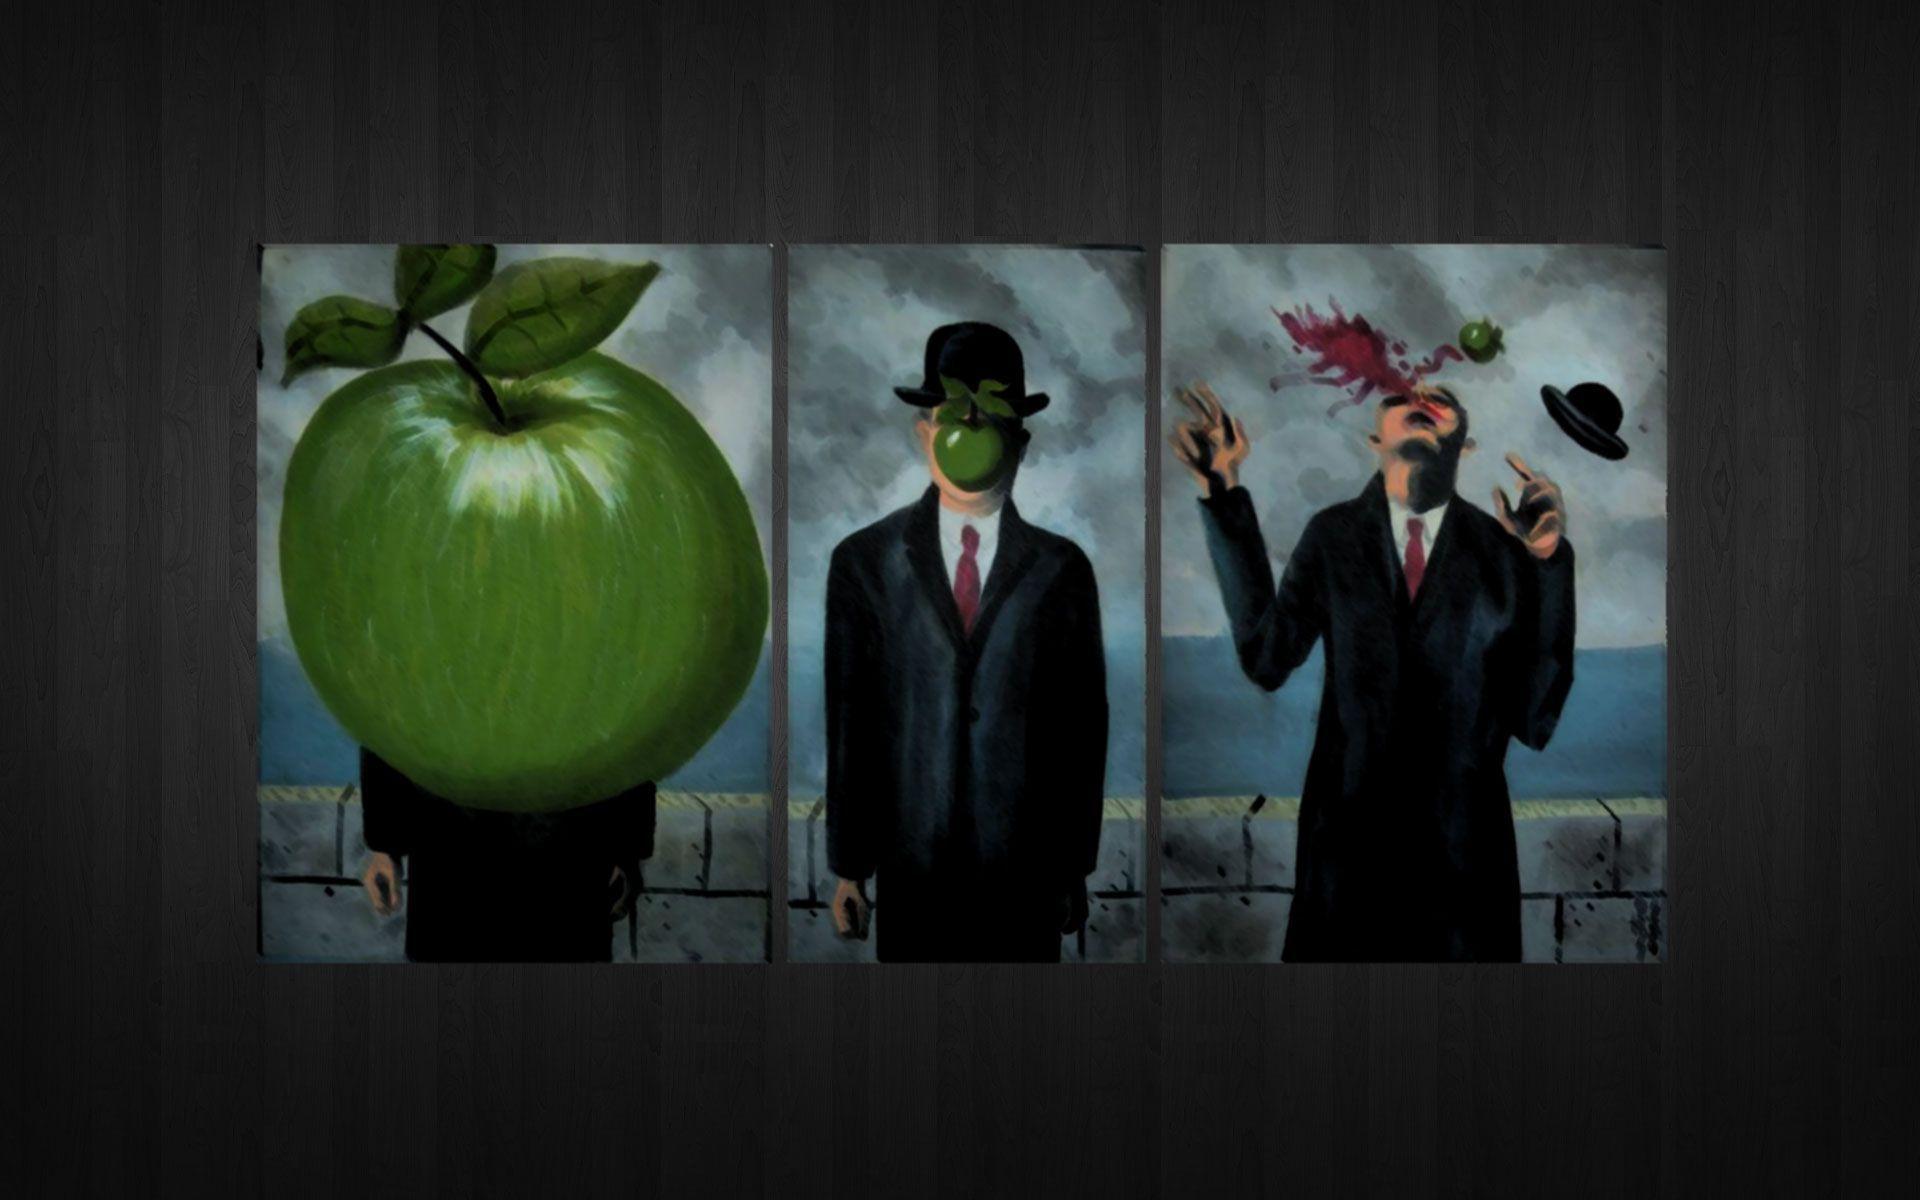 Magritte Wallpapers Wallpaper Cave